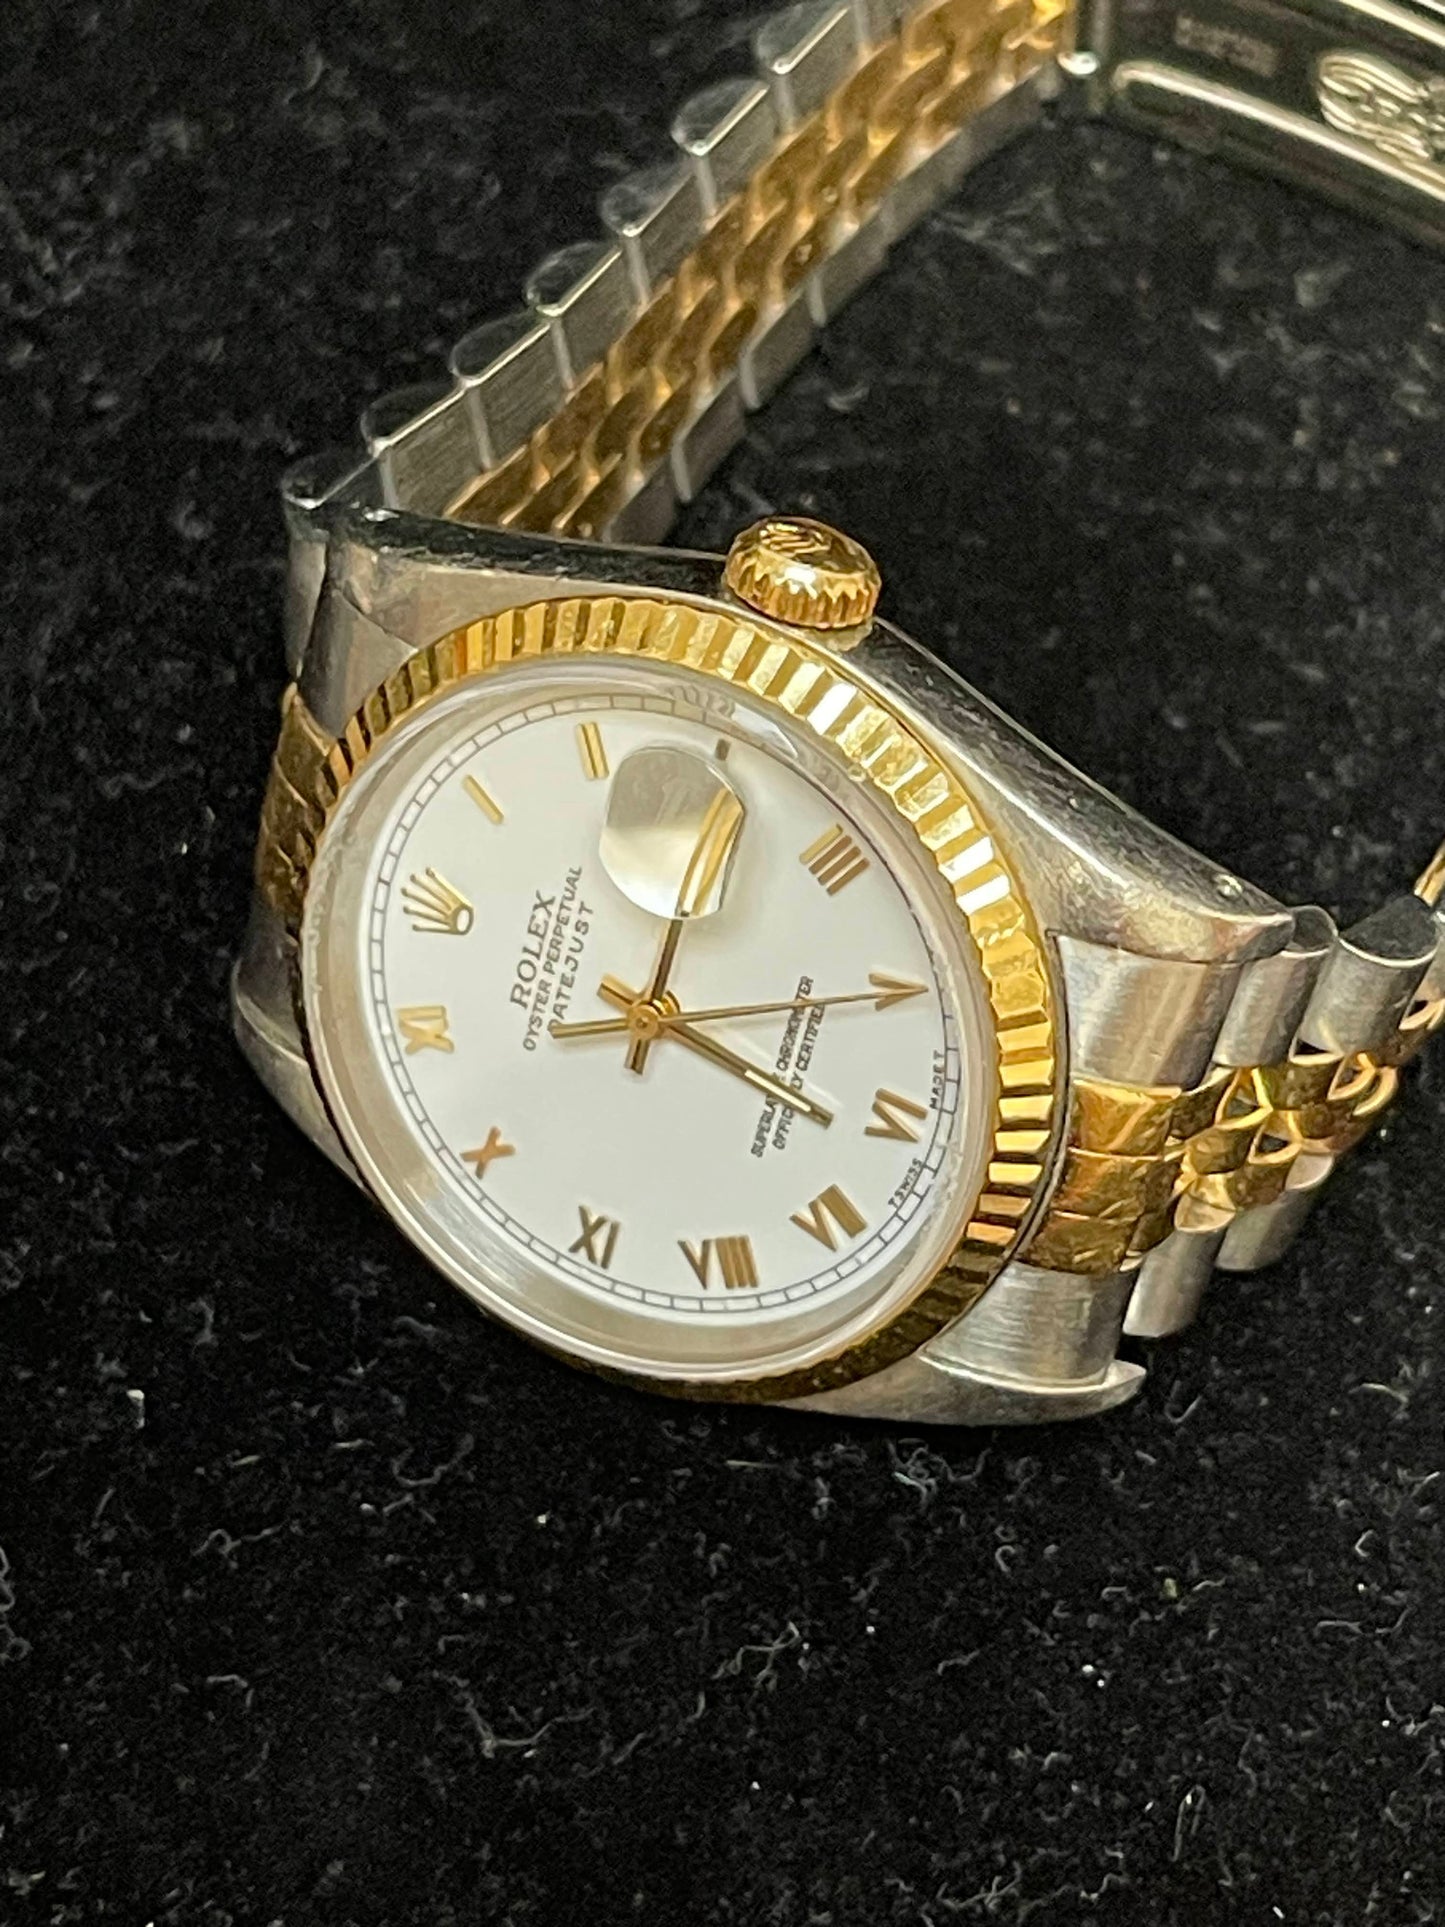 1993 Rolex Datejust 16233 White Roman Dial TT Jubilee No Papers 36mm